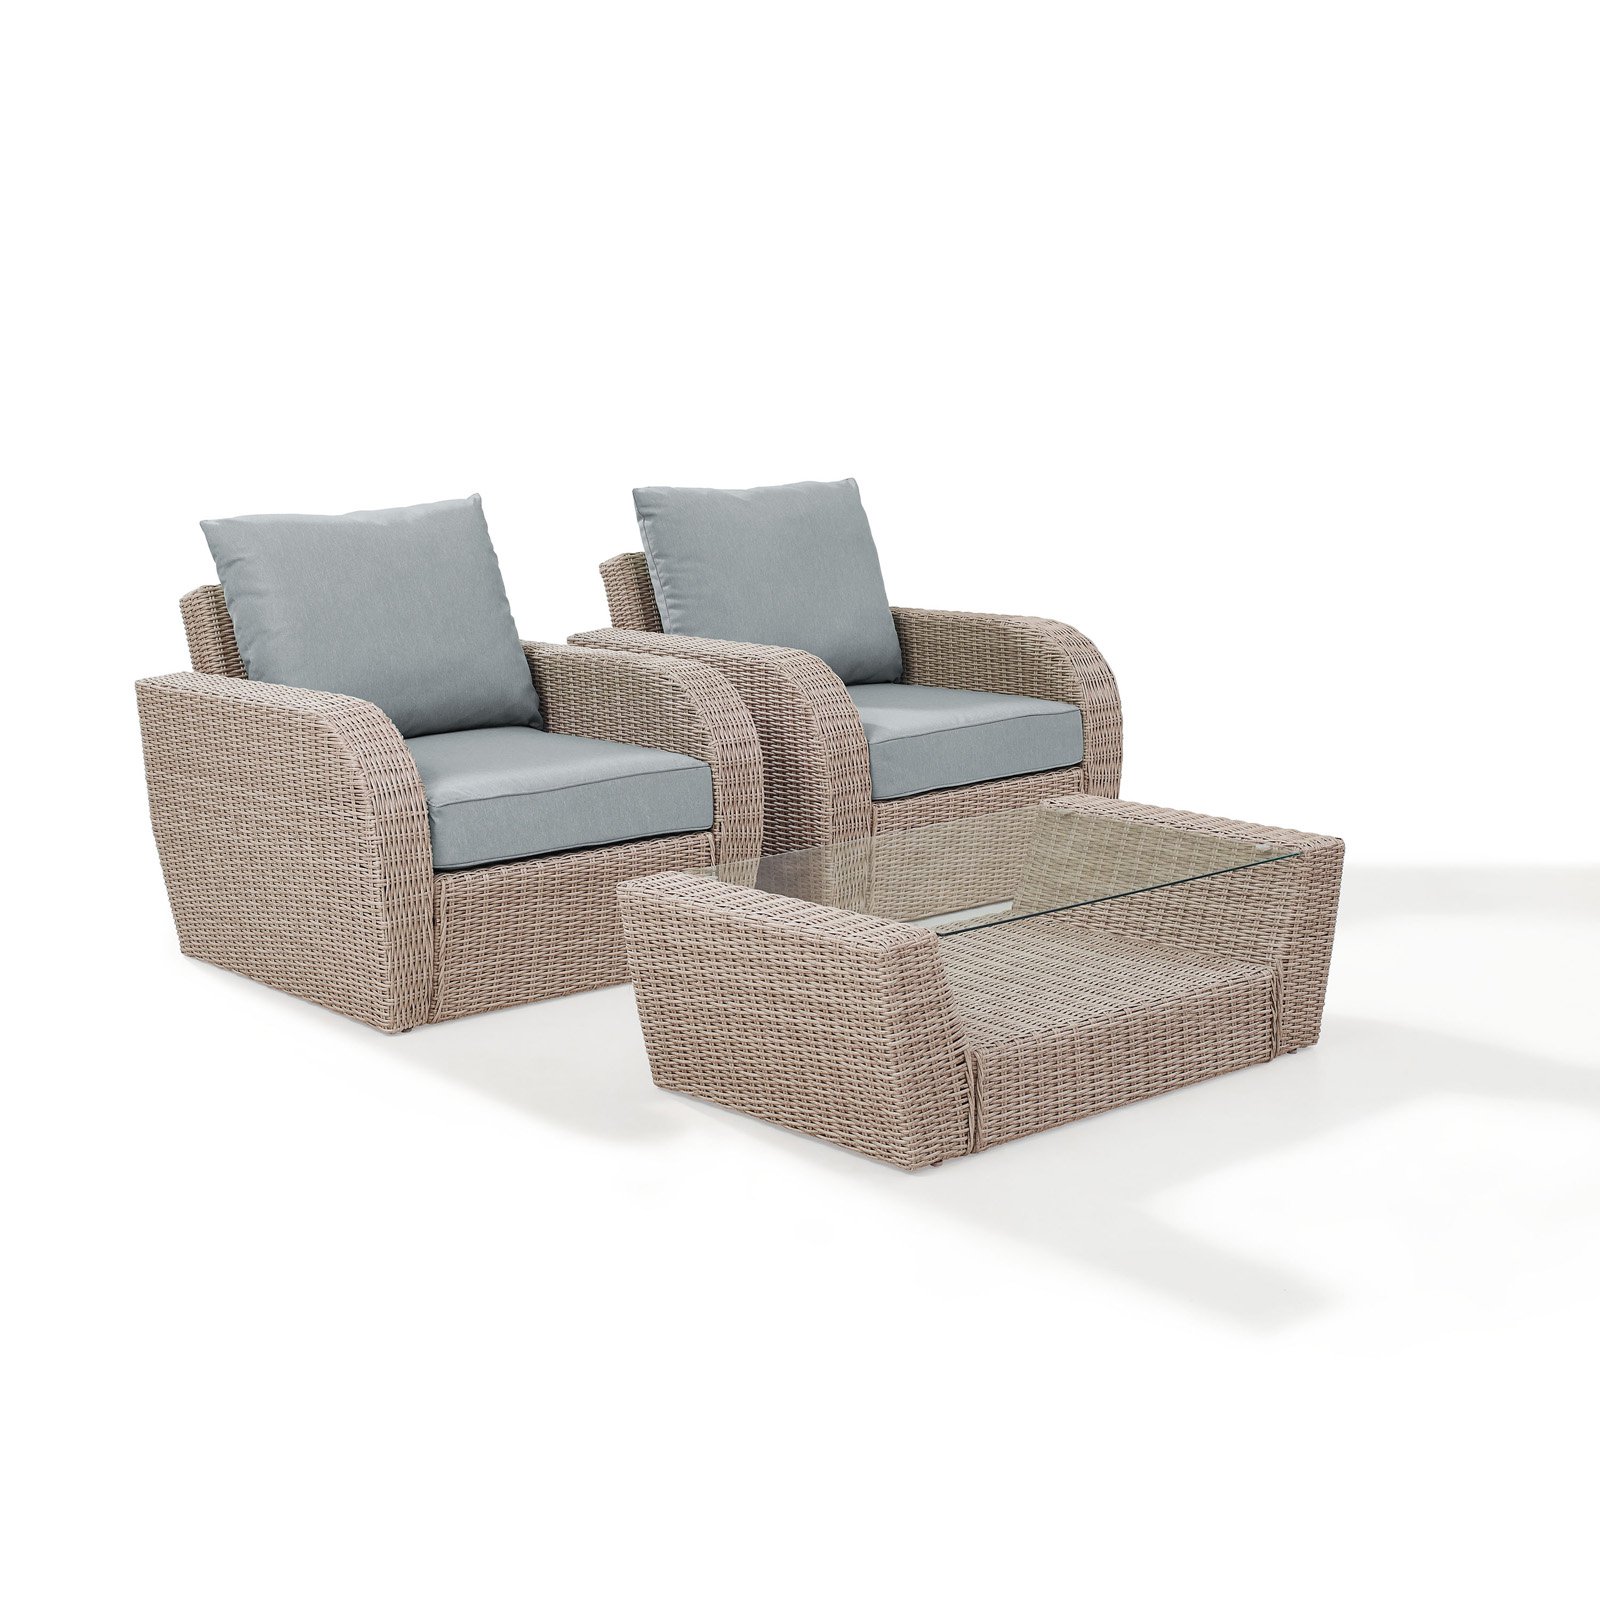 Crosley Furniture St Augustine 3 Pc Outdoor Wicker Seating Set With Mist Cushion - Two Outdoor Wicker Chairs, Coffee Table - image 4 of 11